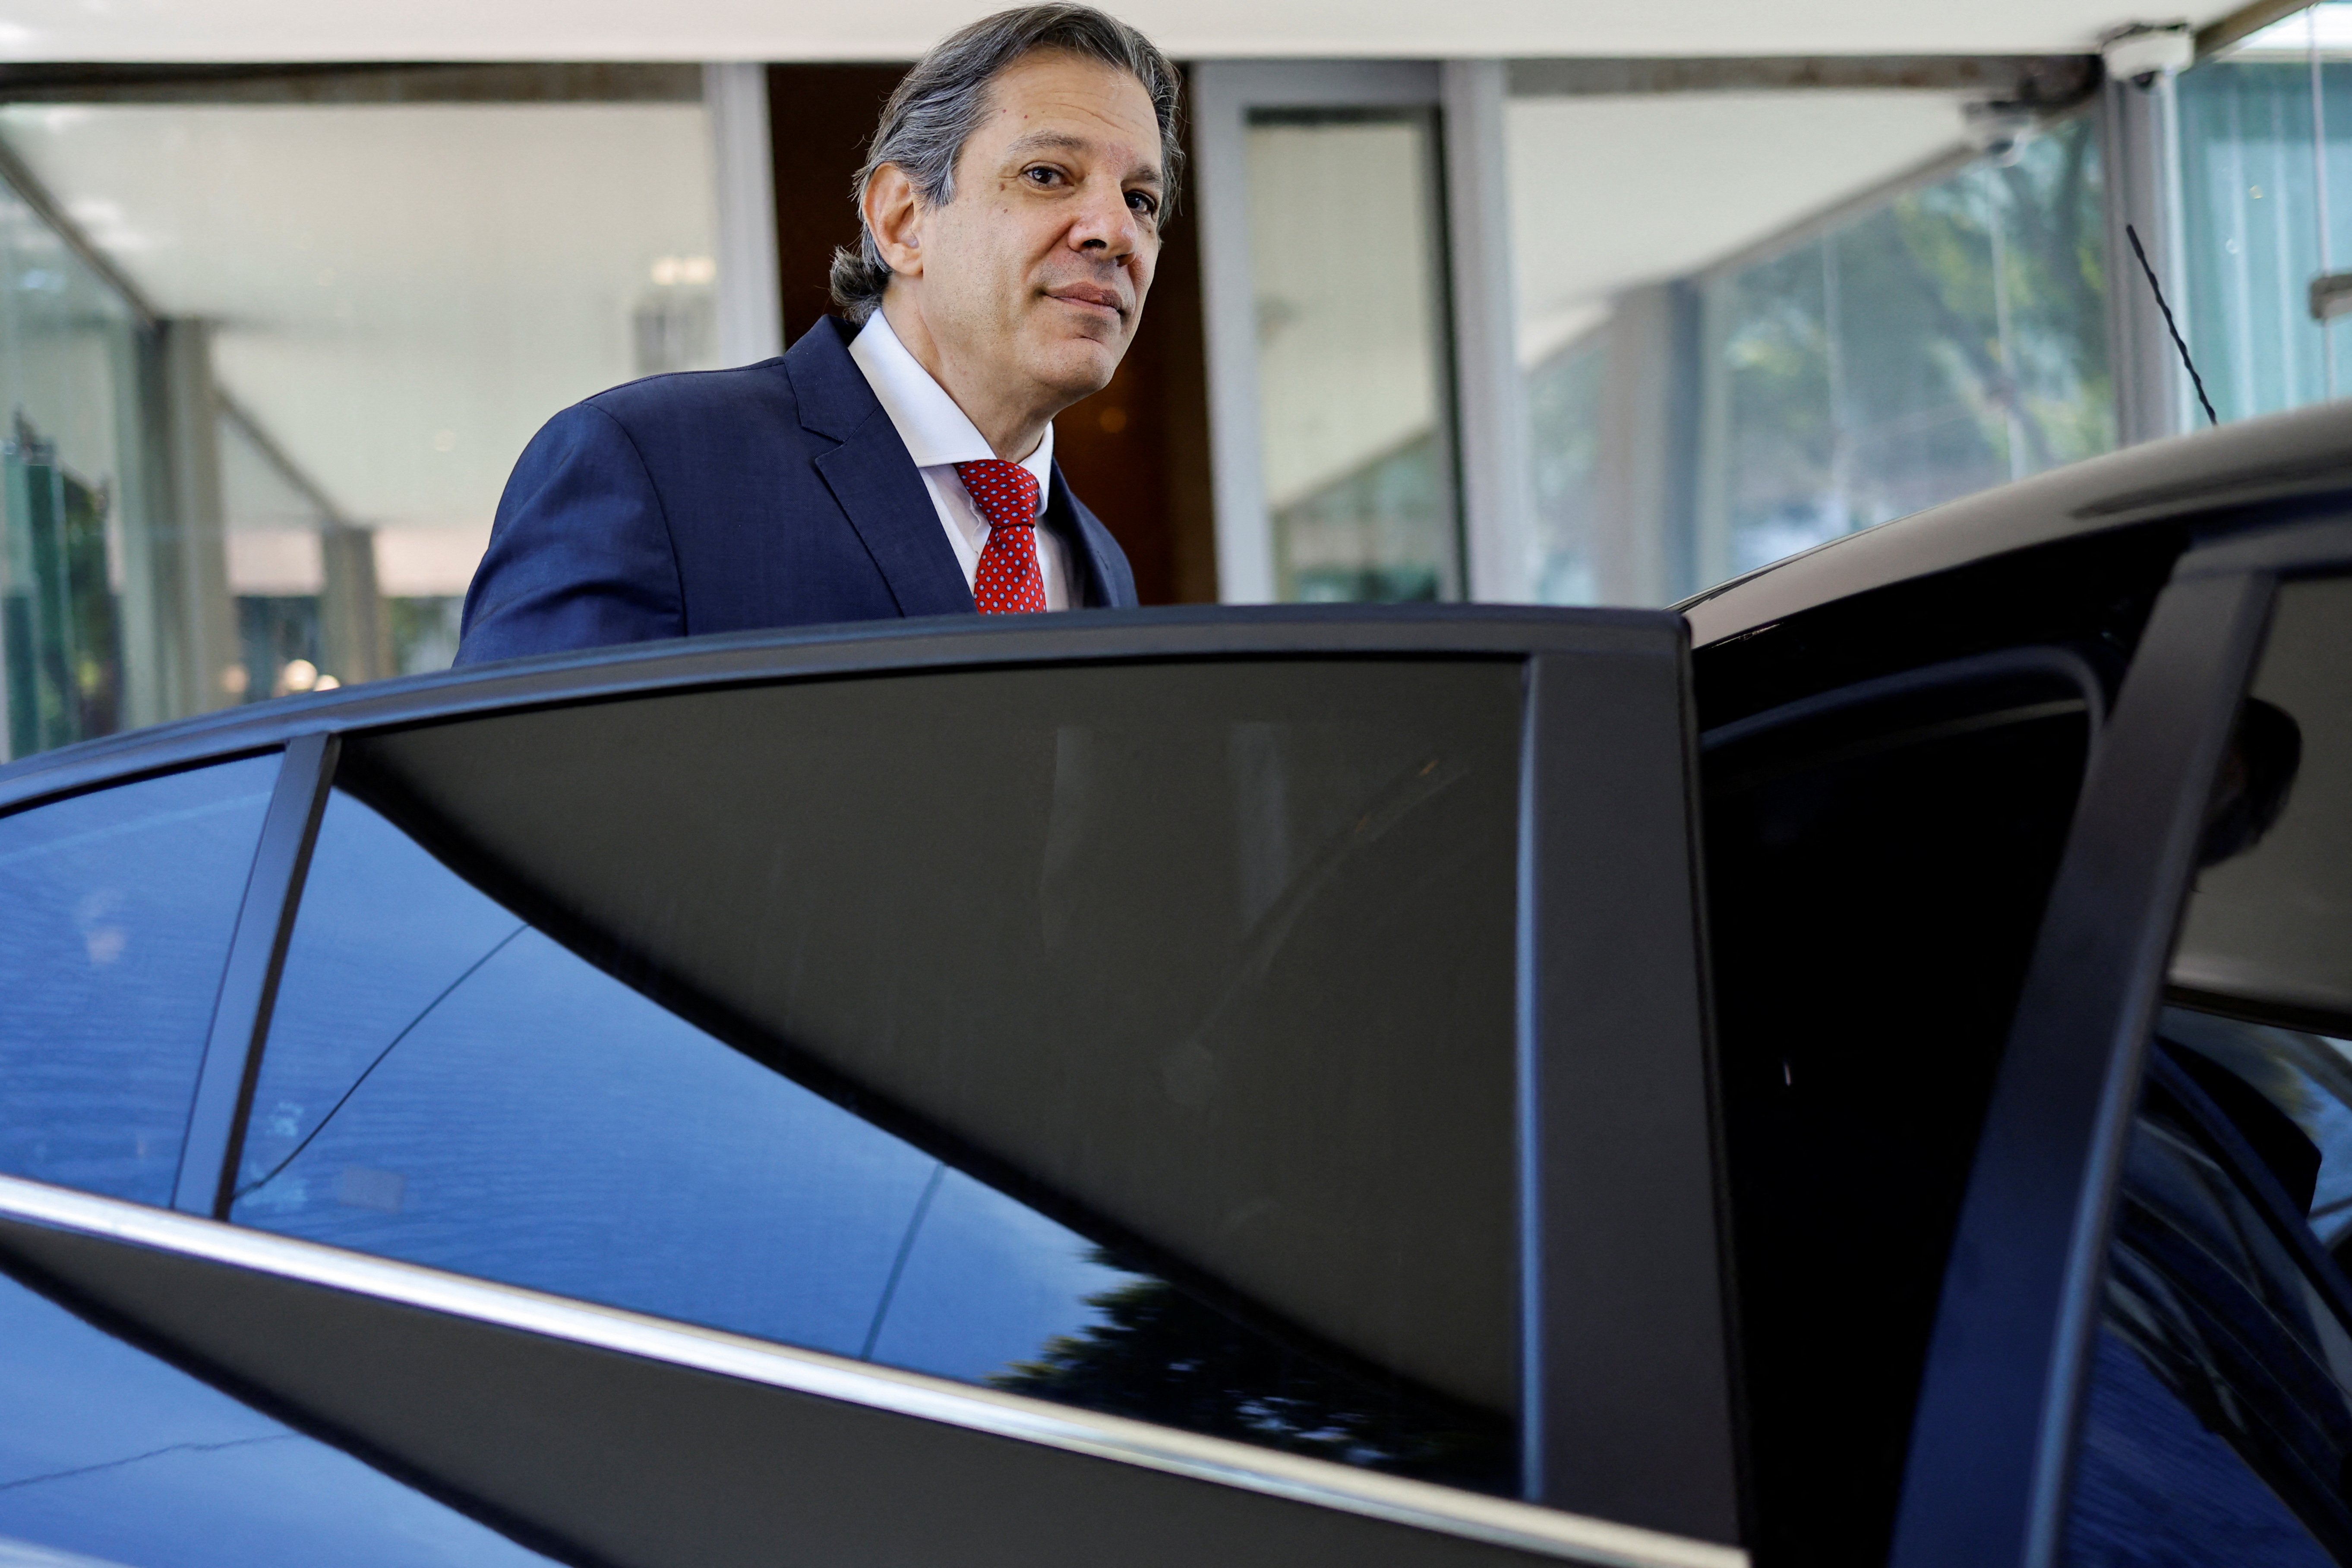 Brazil's Finance Minister Fernando Haddad leaves the Ministry of Finance after a press conference, in Brasilia